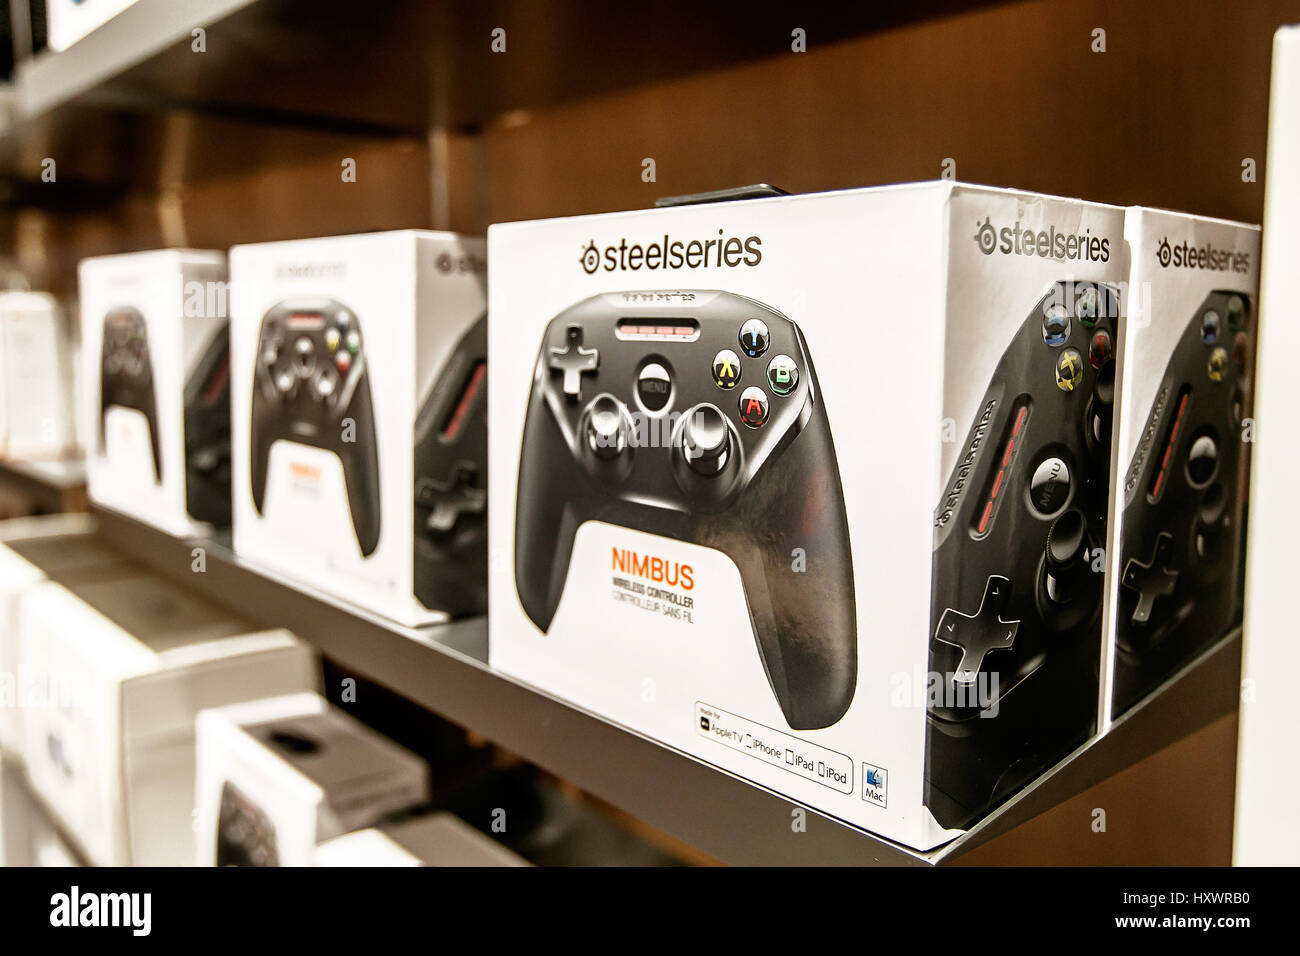 Nimbus - a wireless controller - is offered for sale in an Apple store. Stock Photo